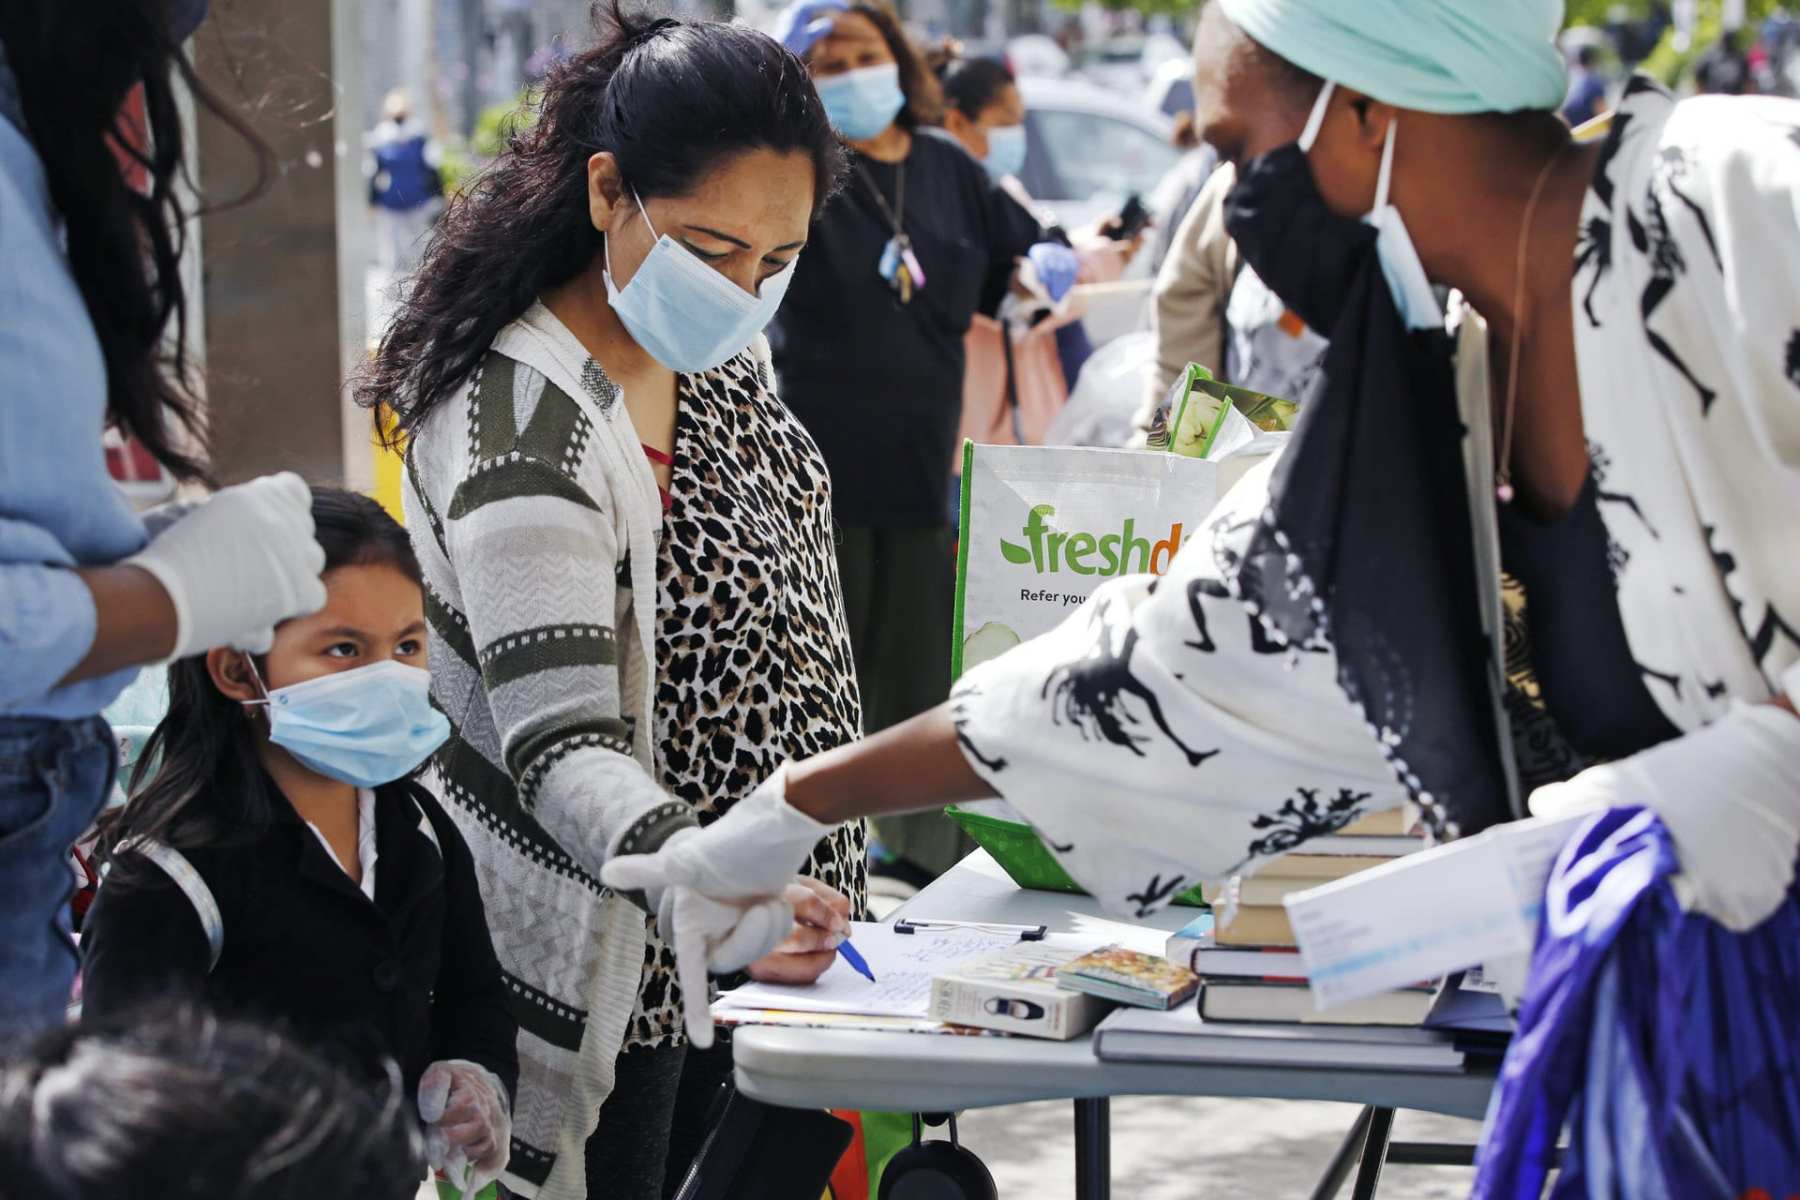 Volunteer Sequaña Williams-Hechavarria, right, instructs youngster Jade Suarez to look beneath the table for books as Jade's mother, Maria, signs up for assistance and free supplies provided by Sistas Van during the coronavirus outbreak at a busy Bushwick intersection in the Brooklyn borough of New York, Tuesday, May 19, 2020. Sistas Van was originally launched by the nonprofit Black Women's Blueprint to help survivors of sexual and reproductive violence and physical abuse. But during the coronavirus, the women's network has pivoted to delivering badly-needed resources to black and Hispanic communities, which have had some of the city's highest rates of contagion and death toll of the fast-spreading virus.